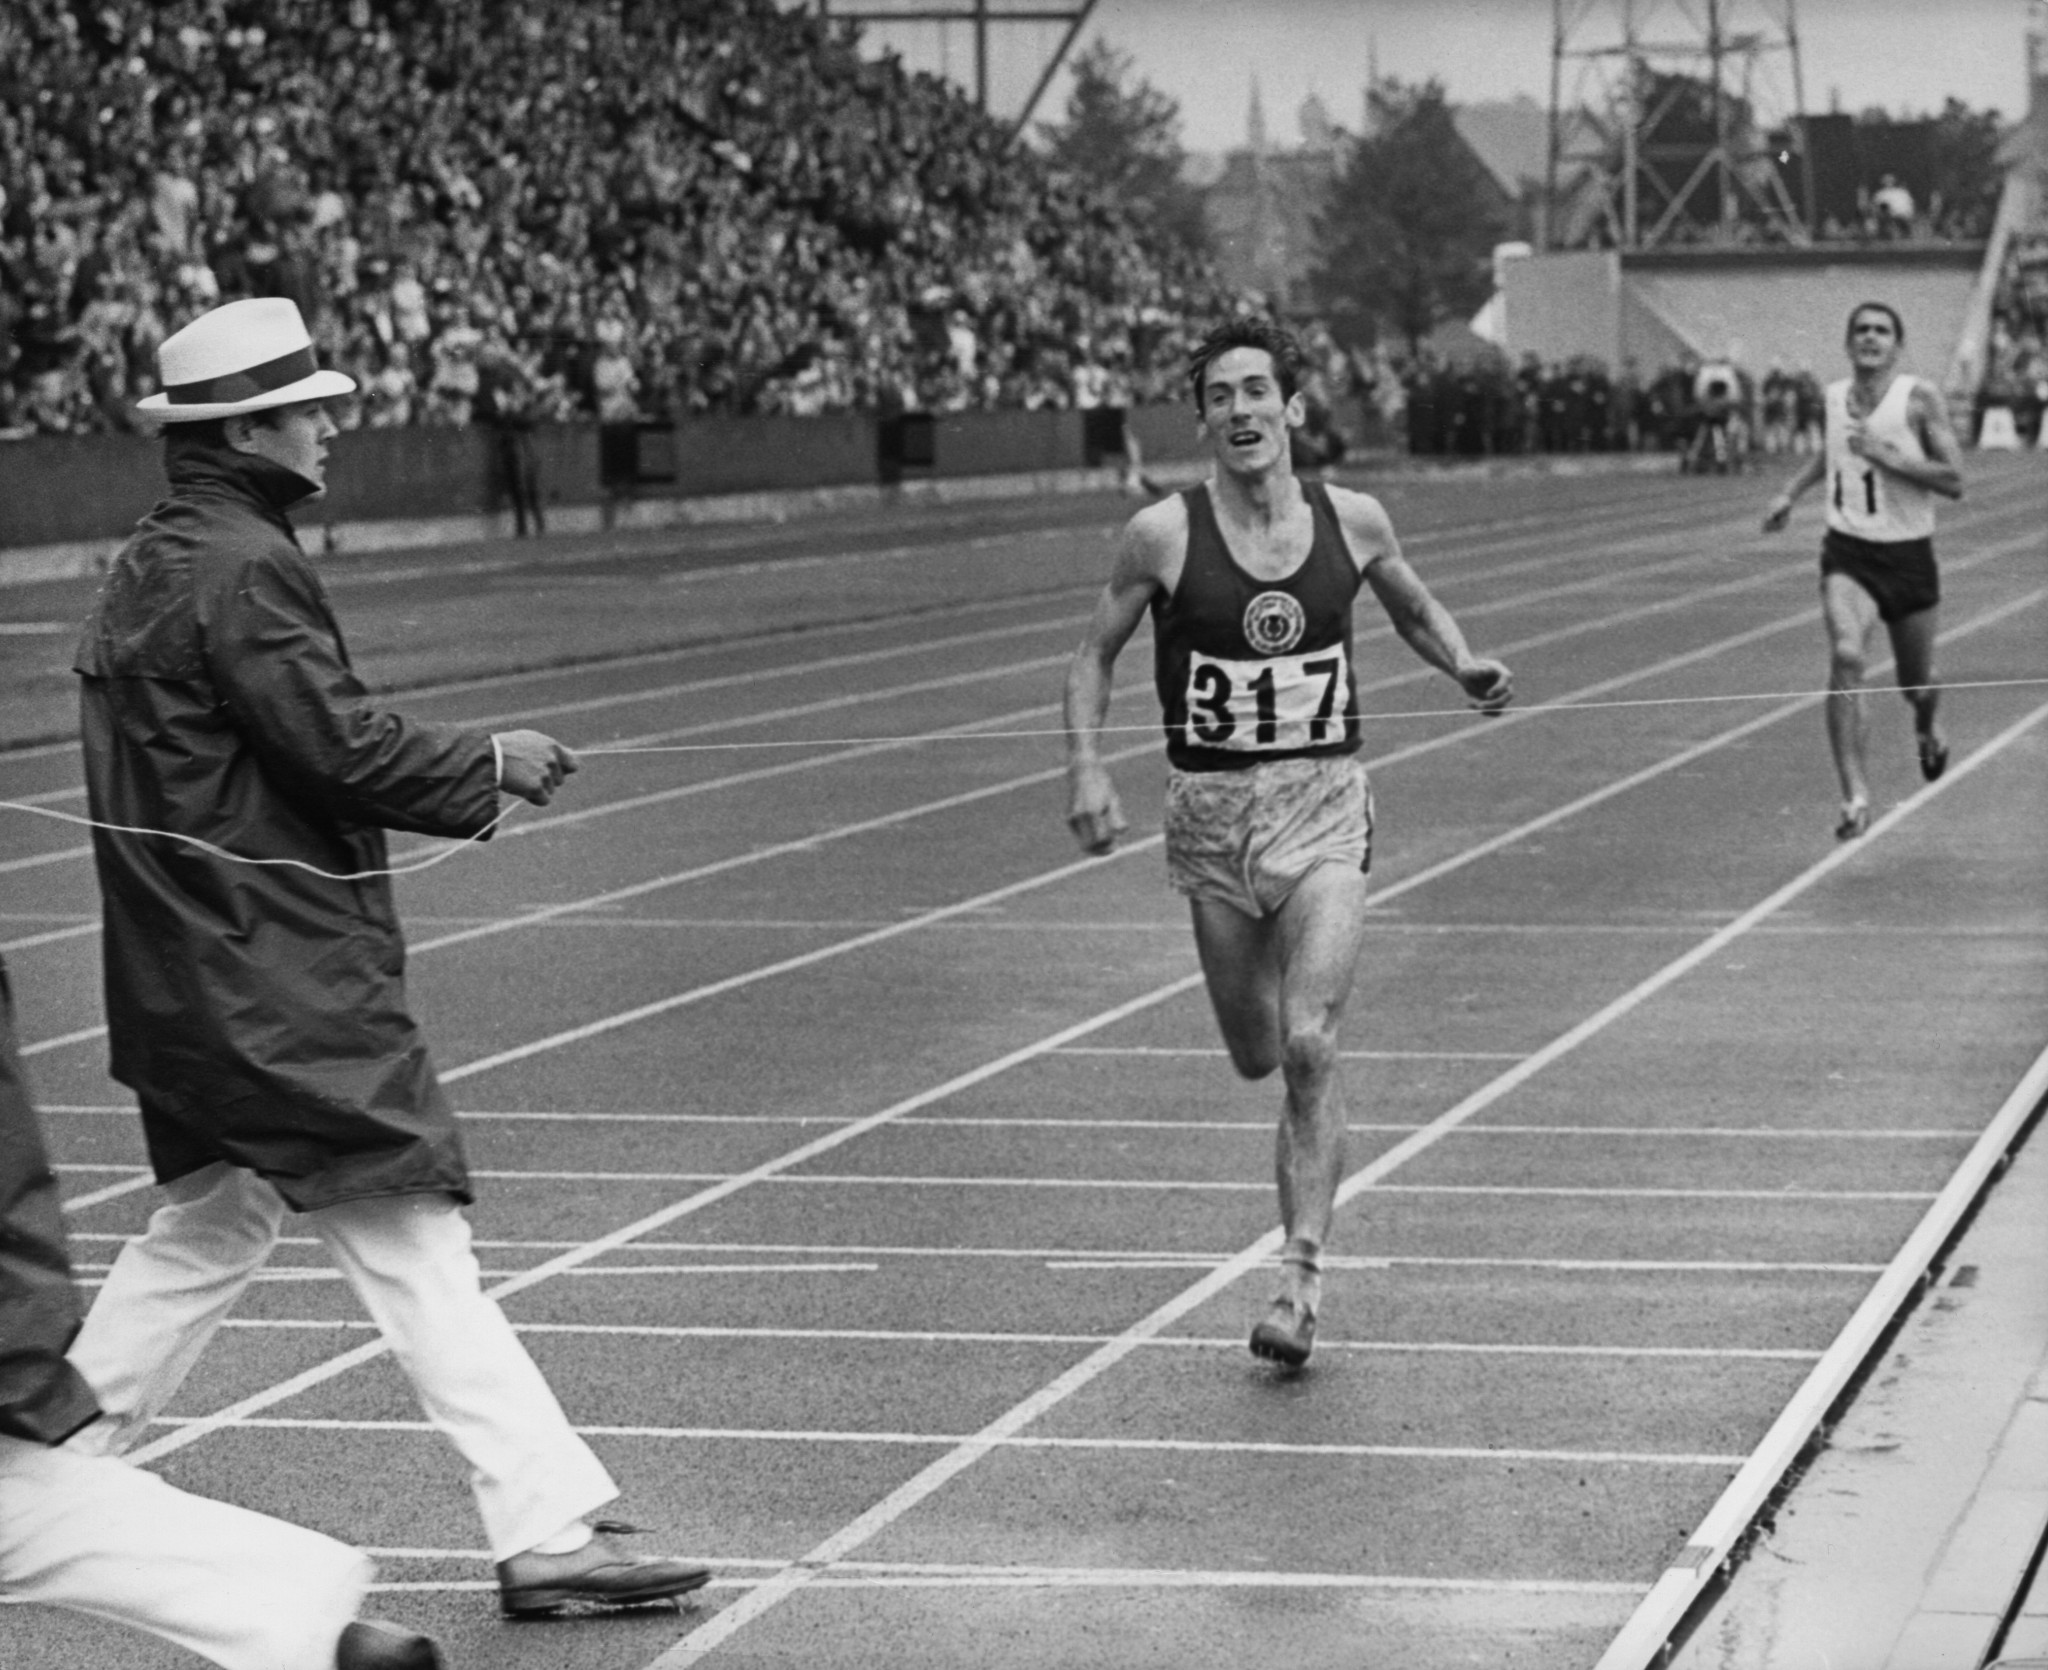 Scotland's Lachie Stewart, whose victory in the 10,000 metres was a highlight of the 1970 Commonwealth Games, has had part of his leg amputated almost 50 years to the day after his greatest triumph ©Getty Images